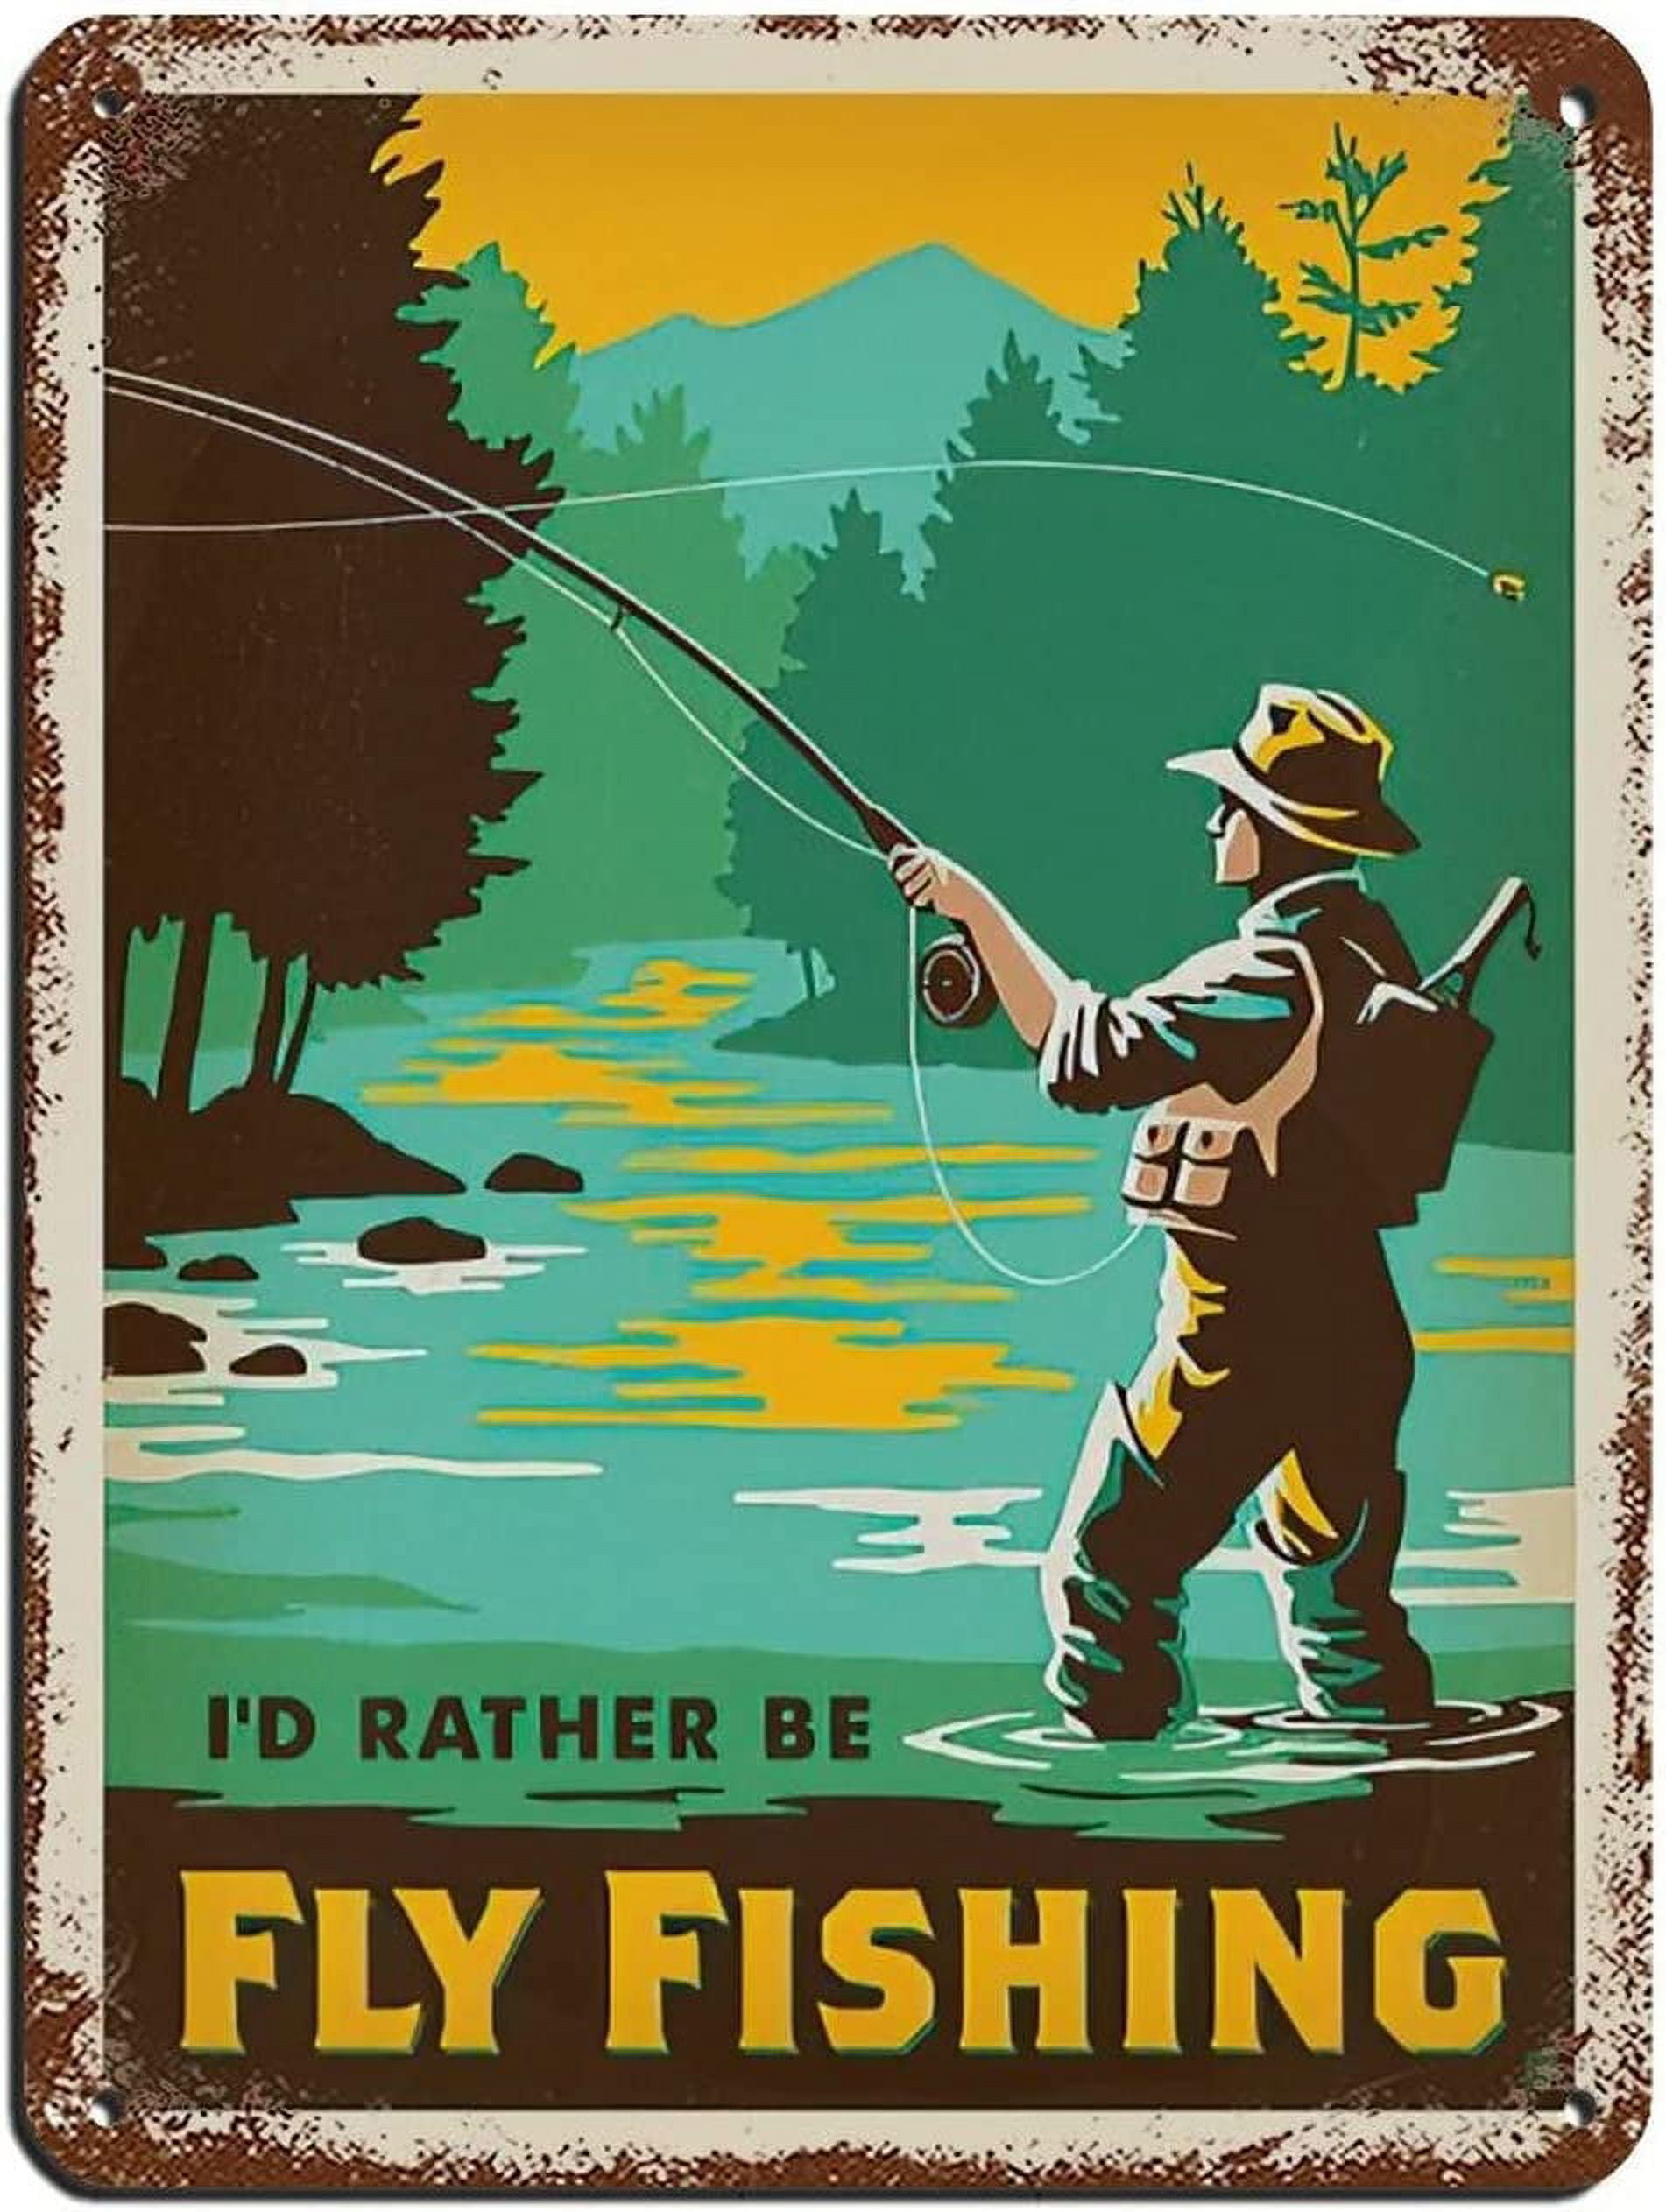 Retro Vintage Travel Lake And Lodge I'd Rather Be Fly Fishing Tin Sign  Vintage Metal Pub Club Cafe Bar Home Wall Art Decoration Poster Retro